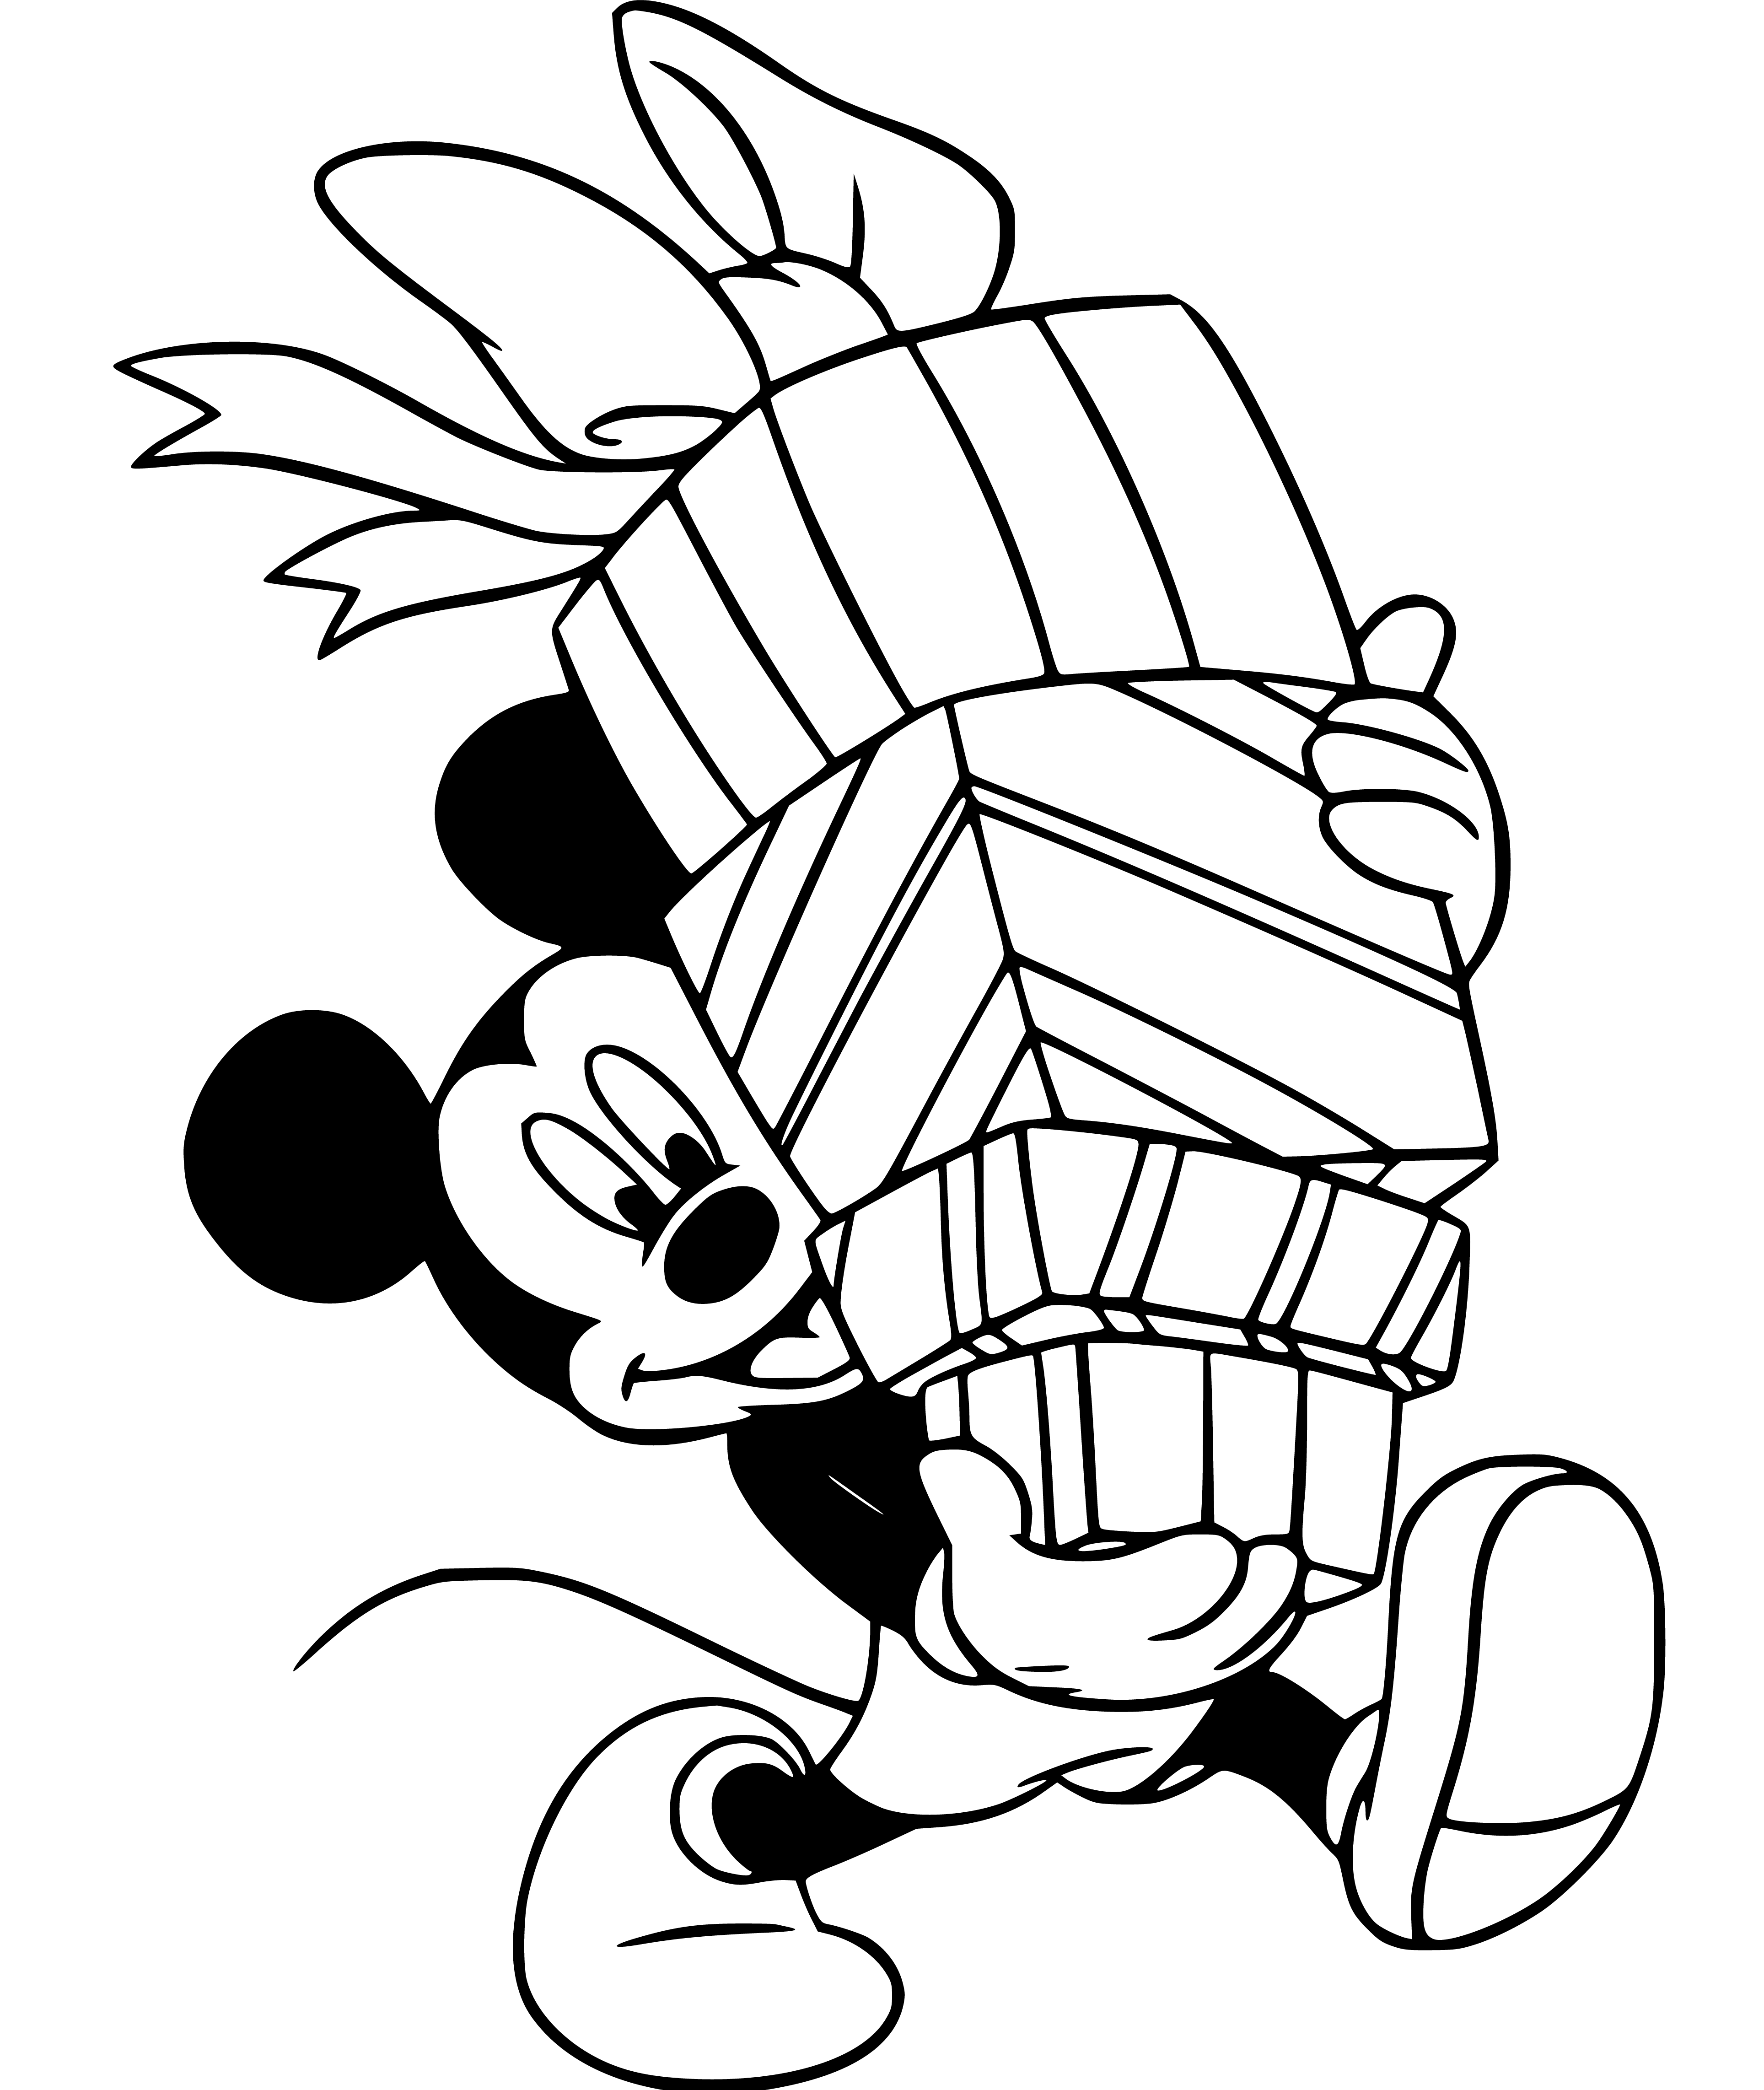 Printable Mickey Mouse carrying presents Coloring Page for kids.